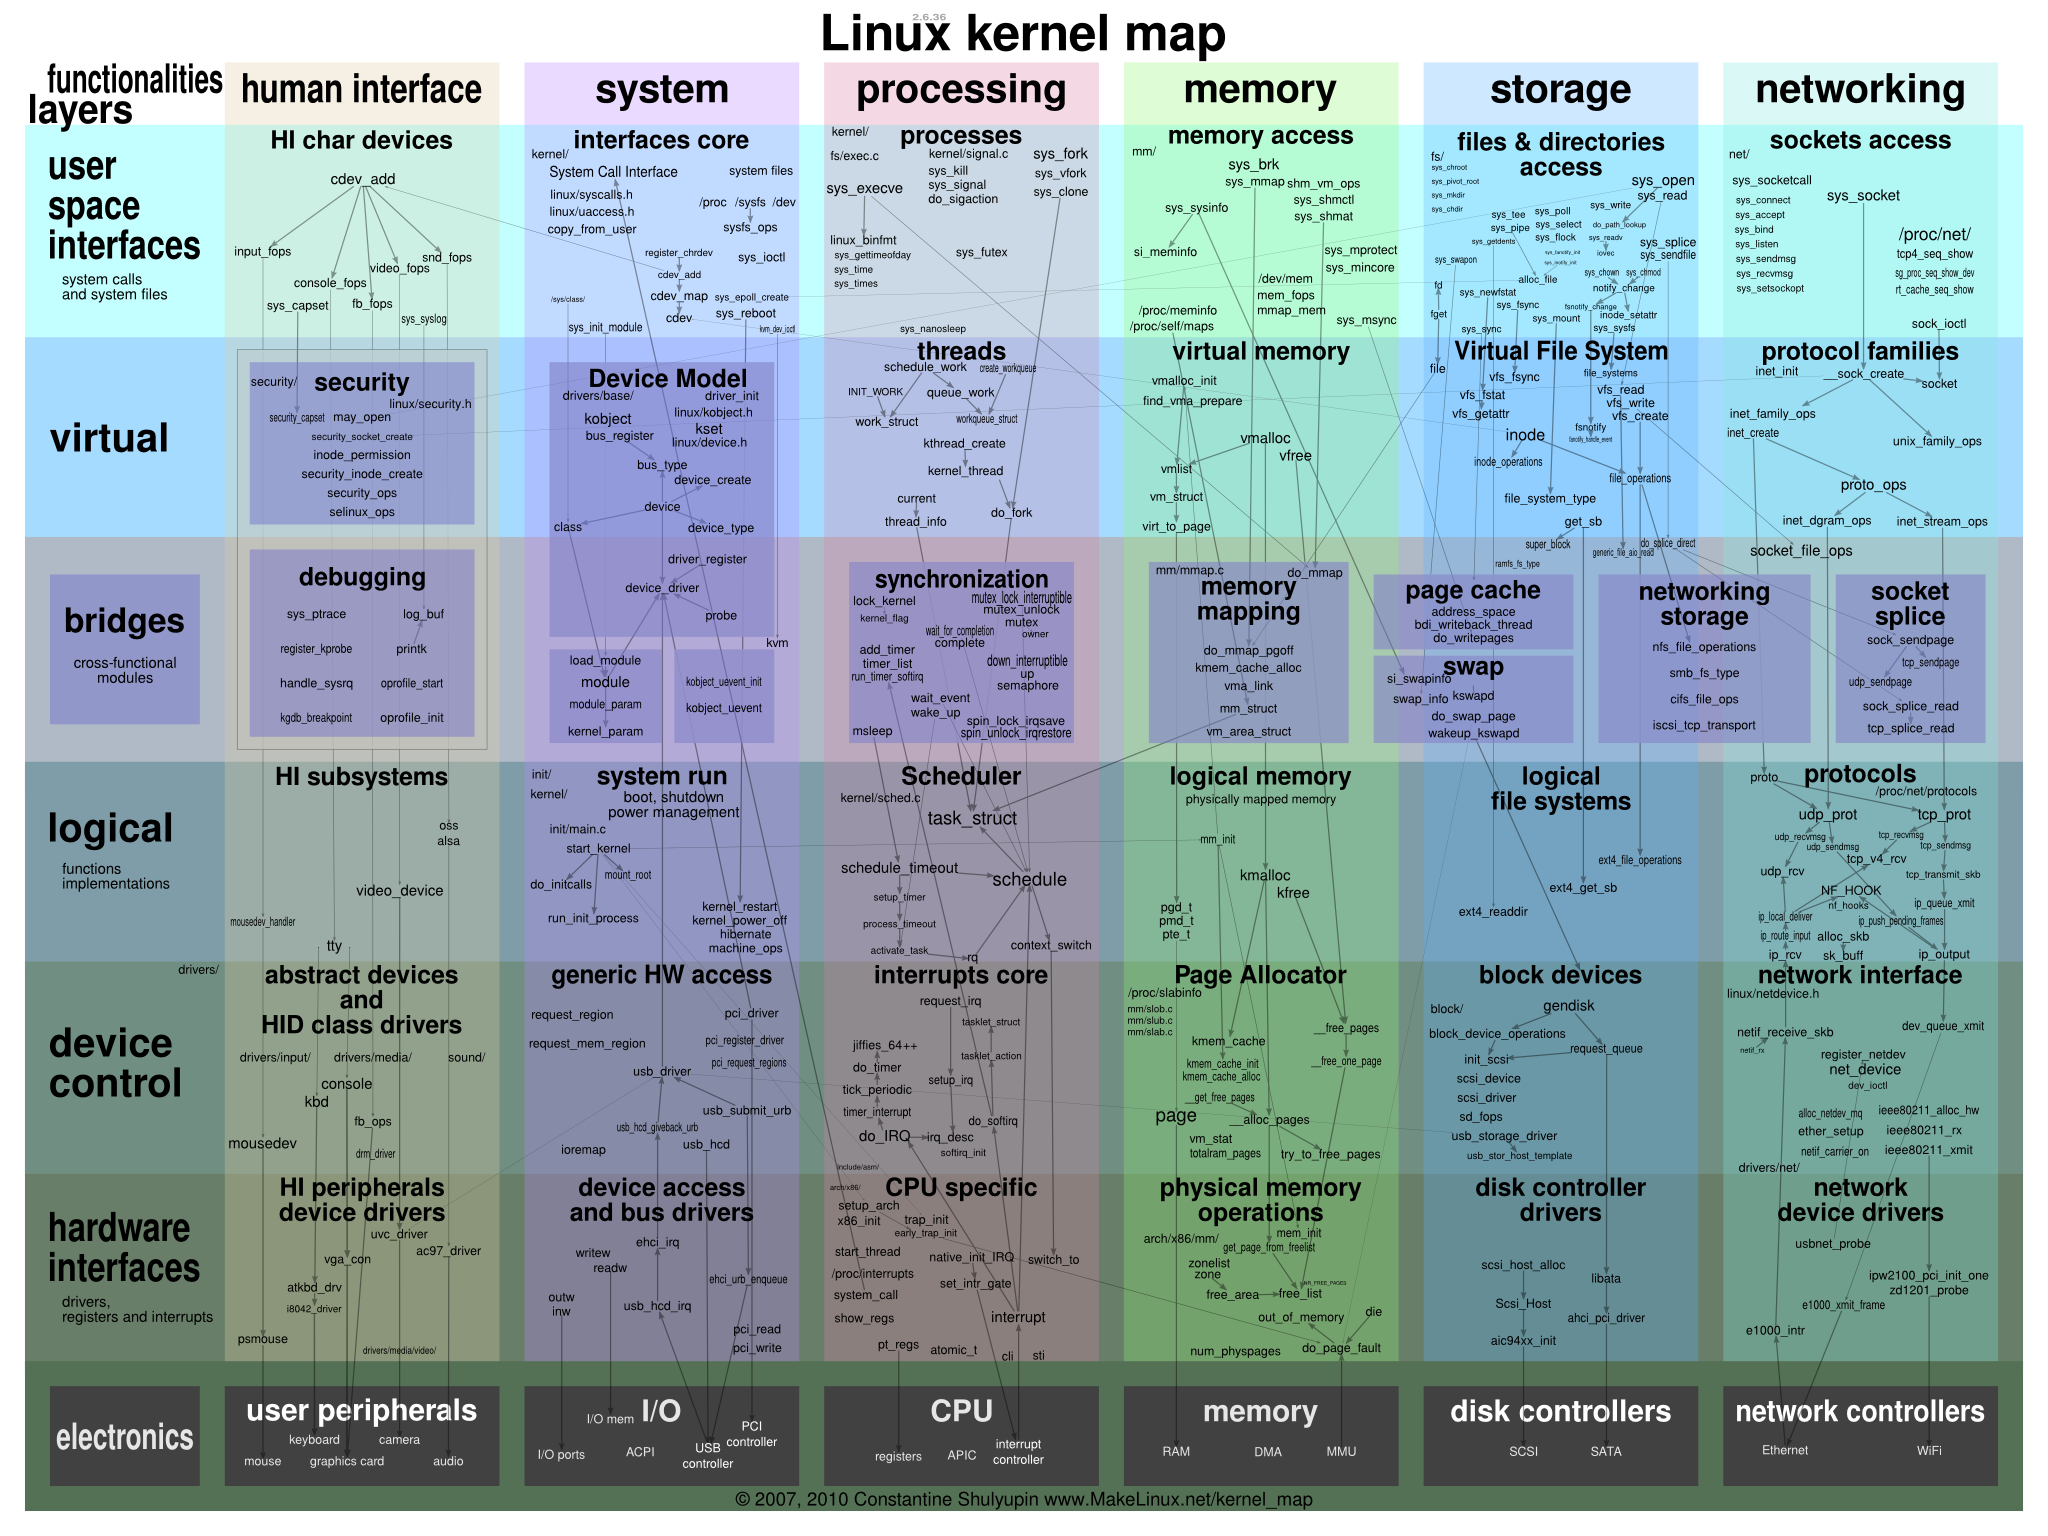 Interactive Linux kernel map